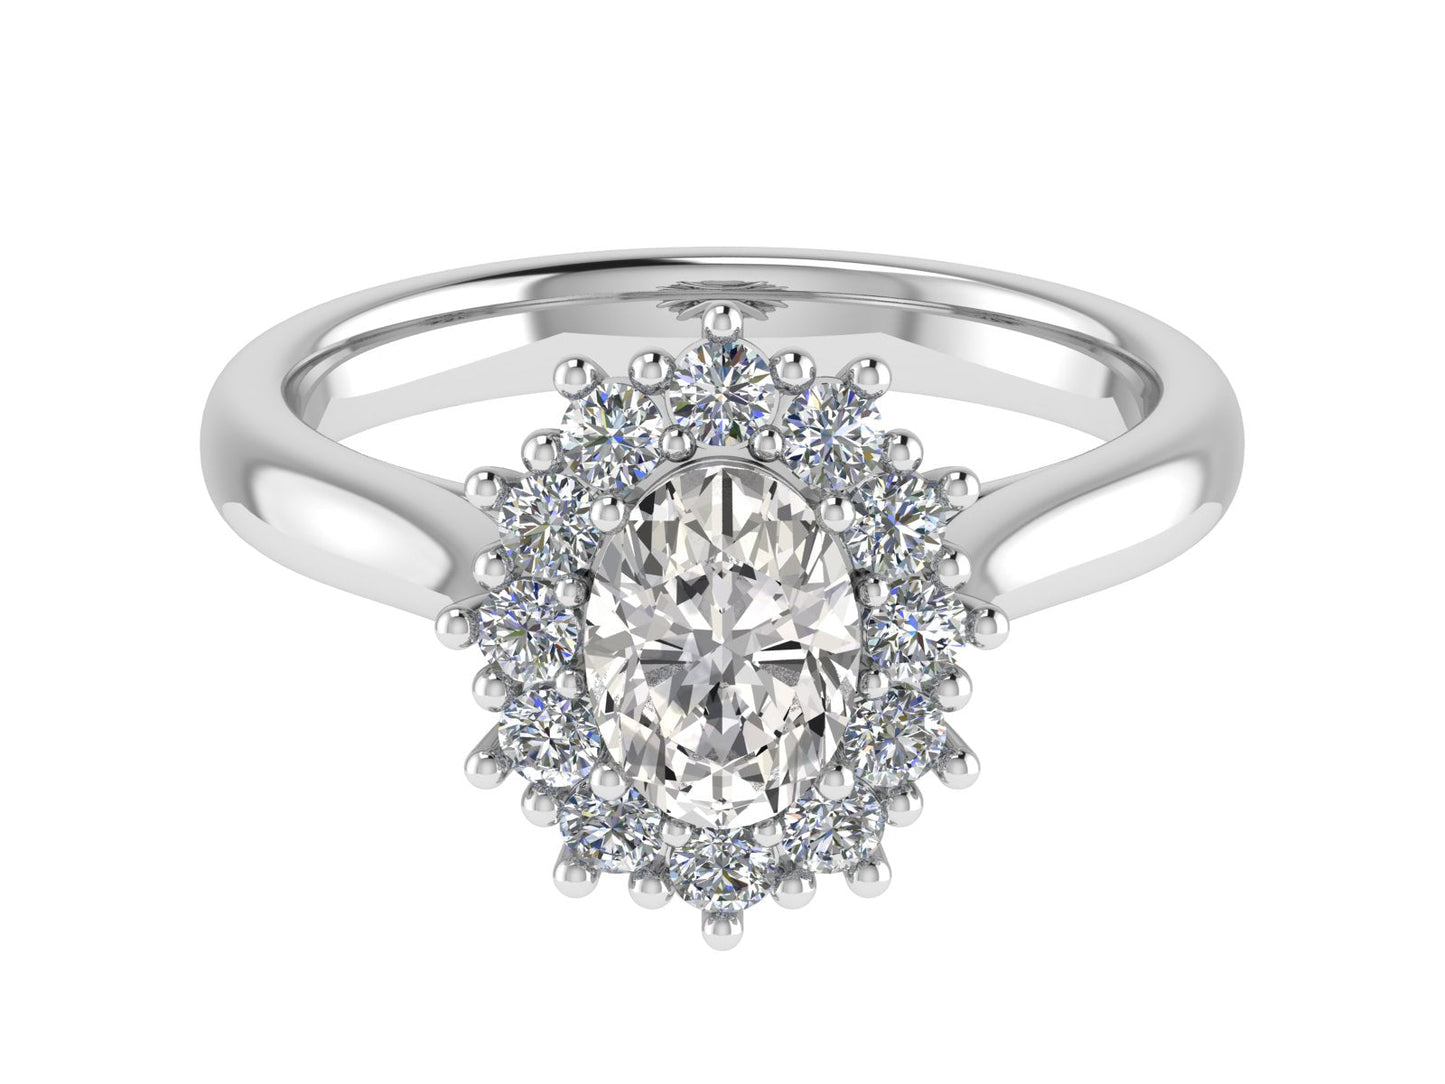 Oval Diamond Cluster Ring 6 x 4mm